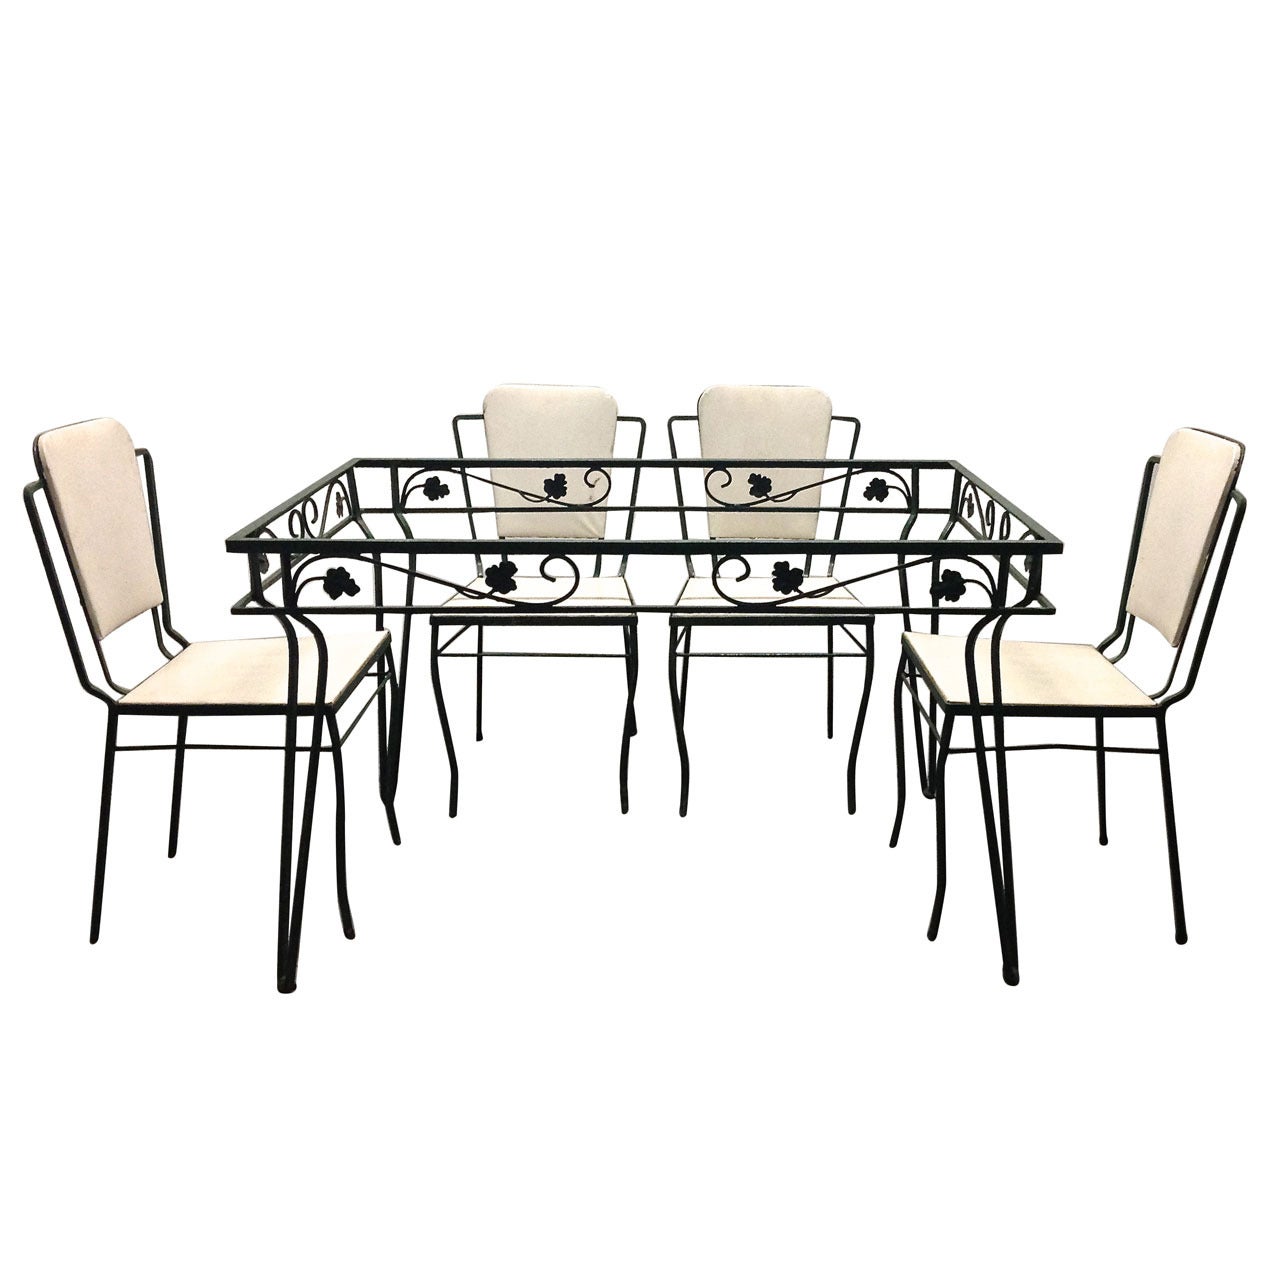 Outdoor Dining Set by Salterini  glass top with 4 Chairs circa 1940 American